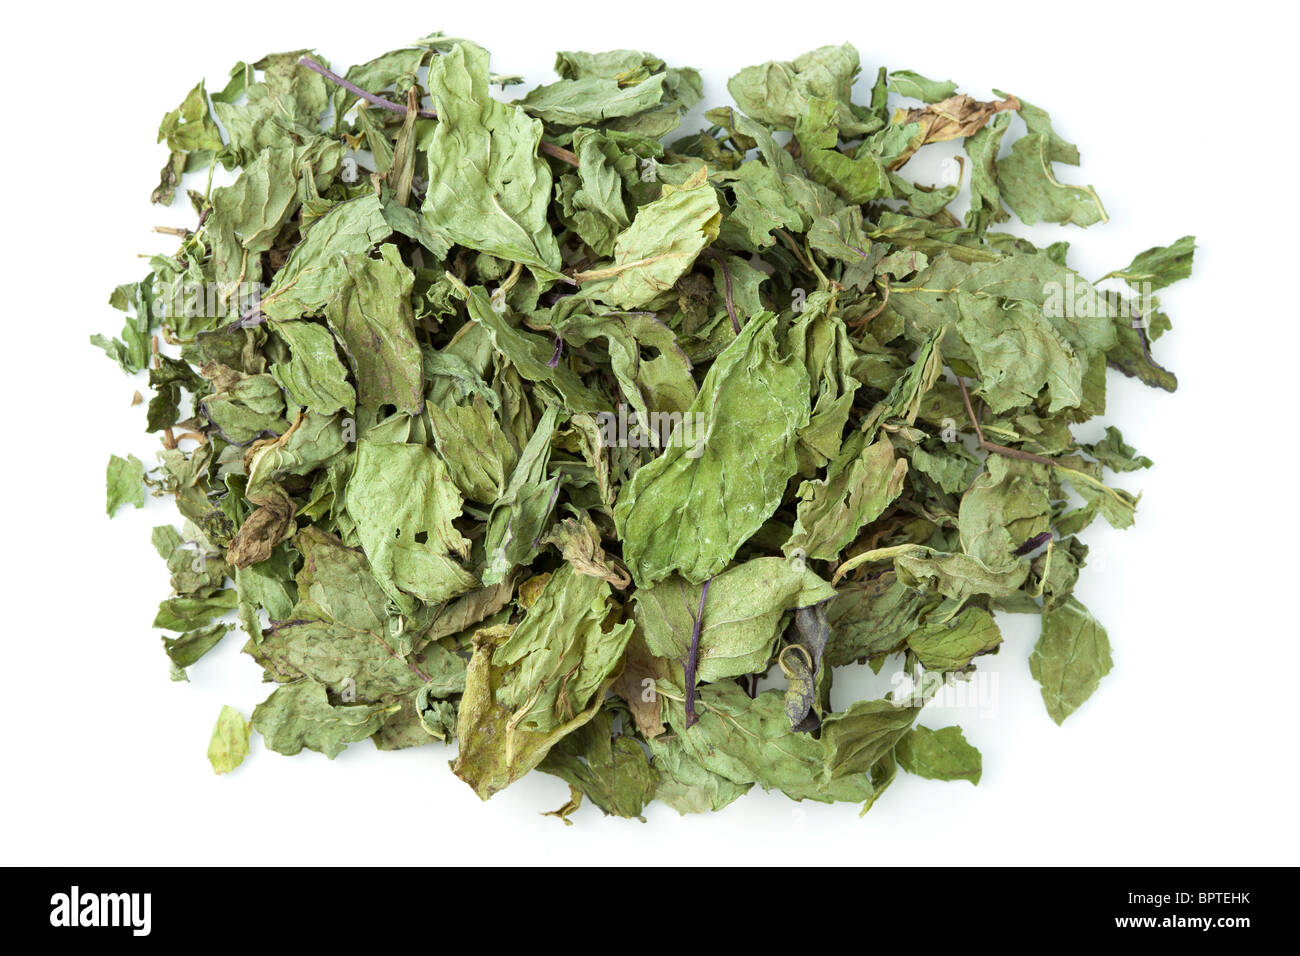 dried peppermint leaves Stock Photo